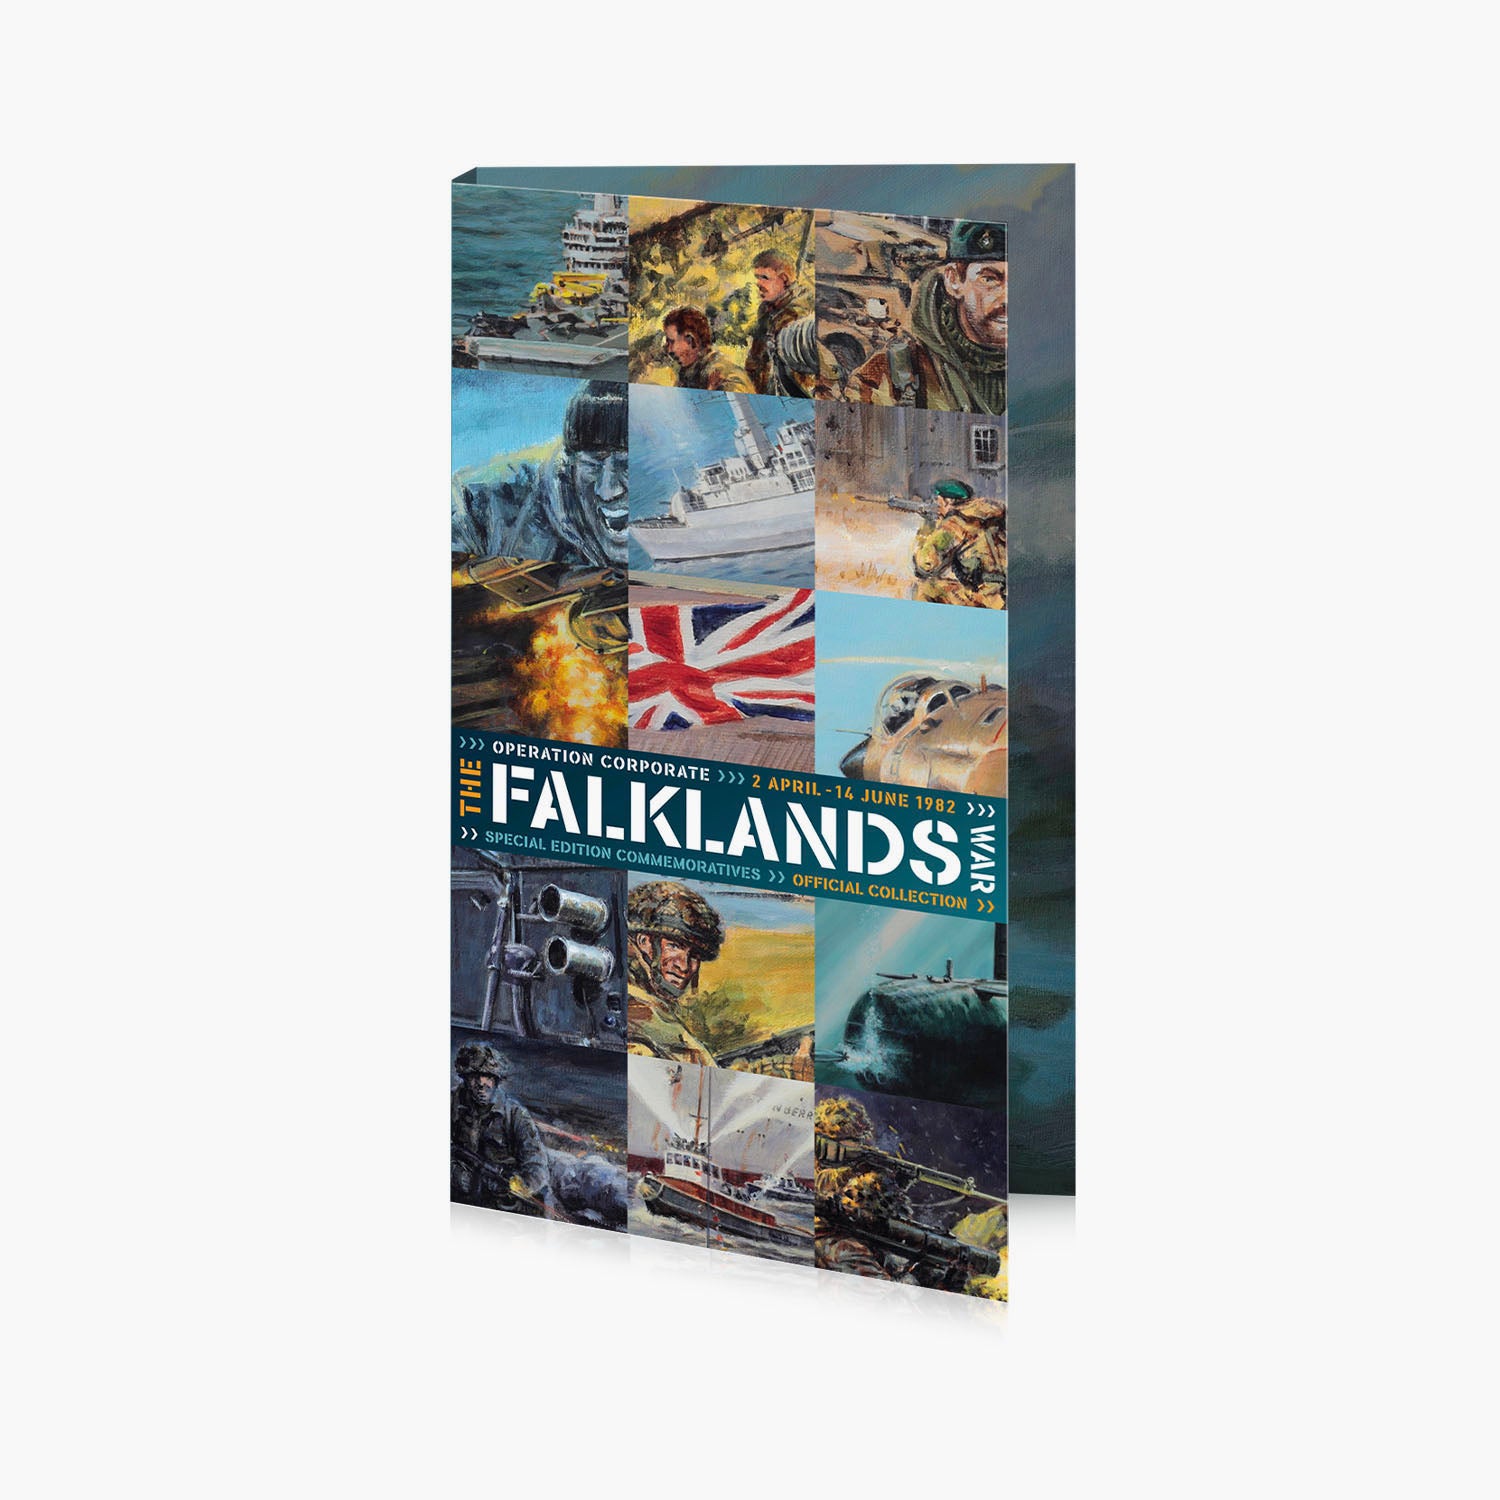 The Official 40th Anniversary of The Falklands War Complete Collection